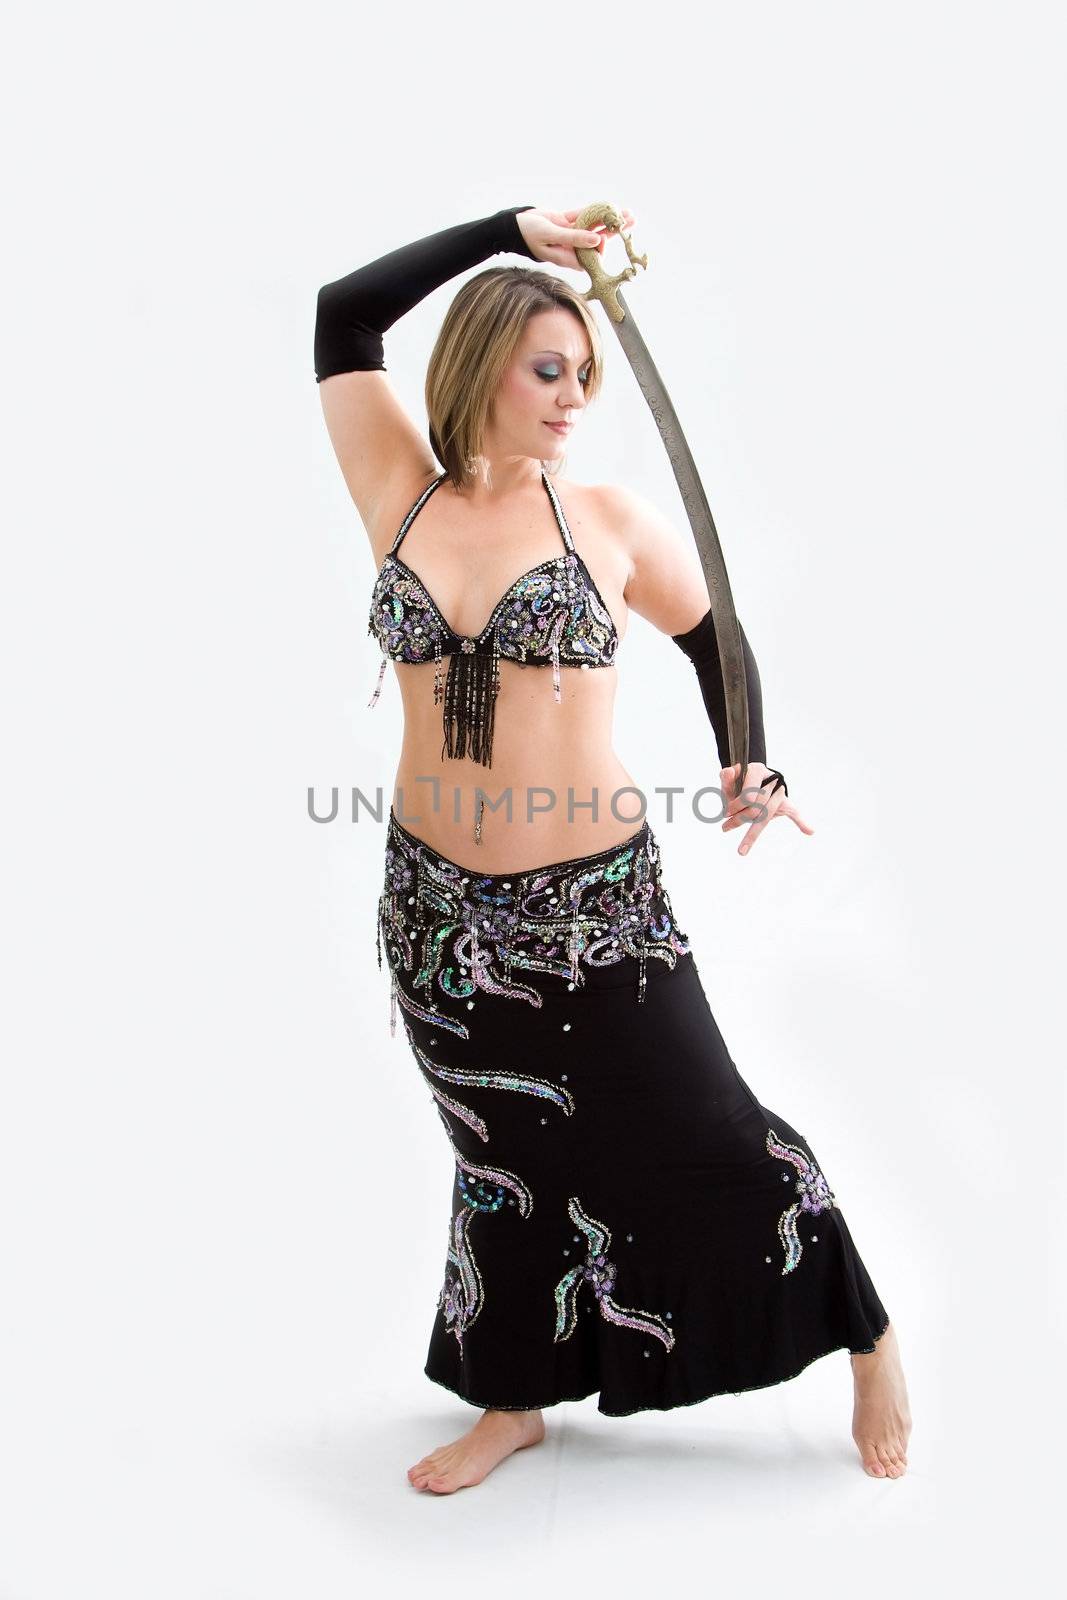 Belly dancer in black by phakimata